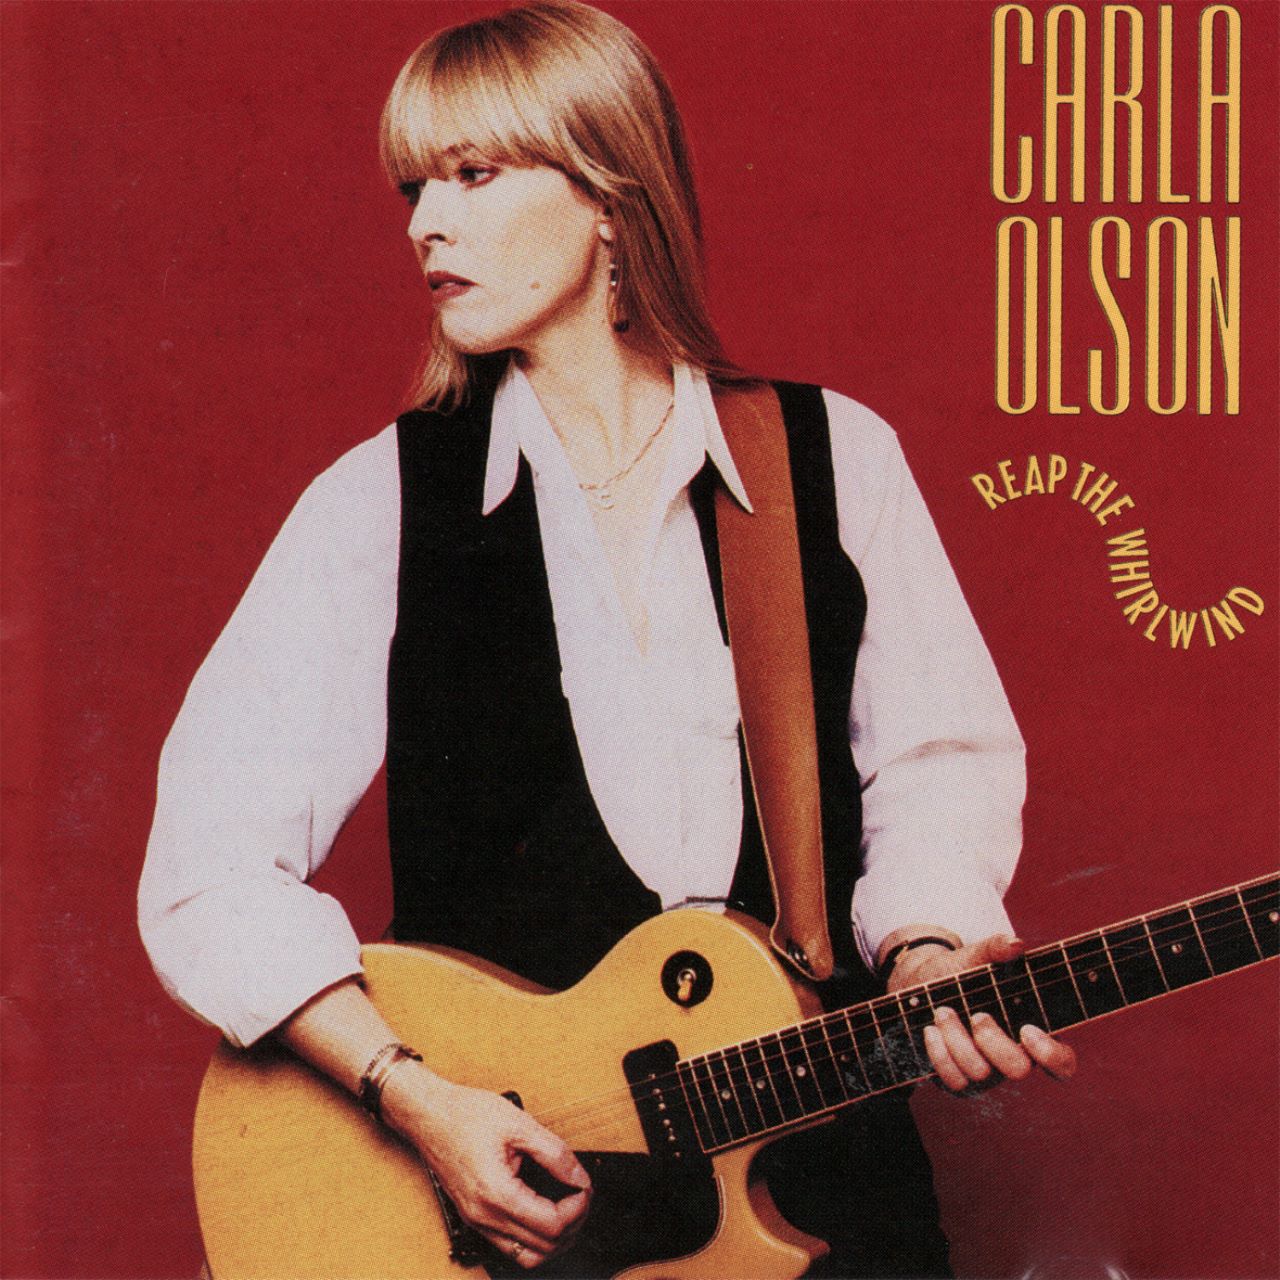 Carla Olson – Reap The Whirlwind cover album